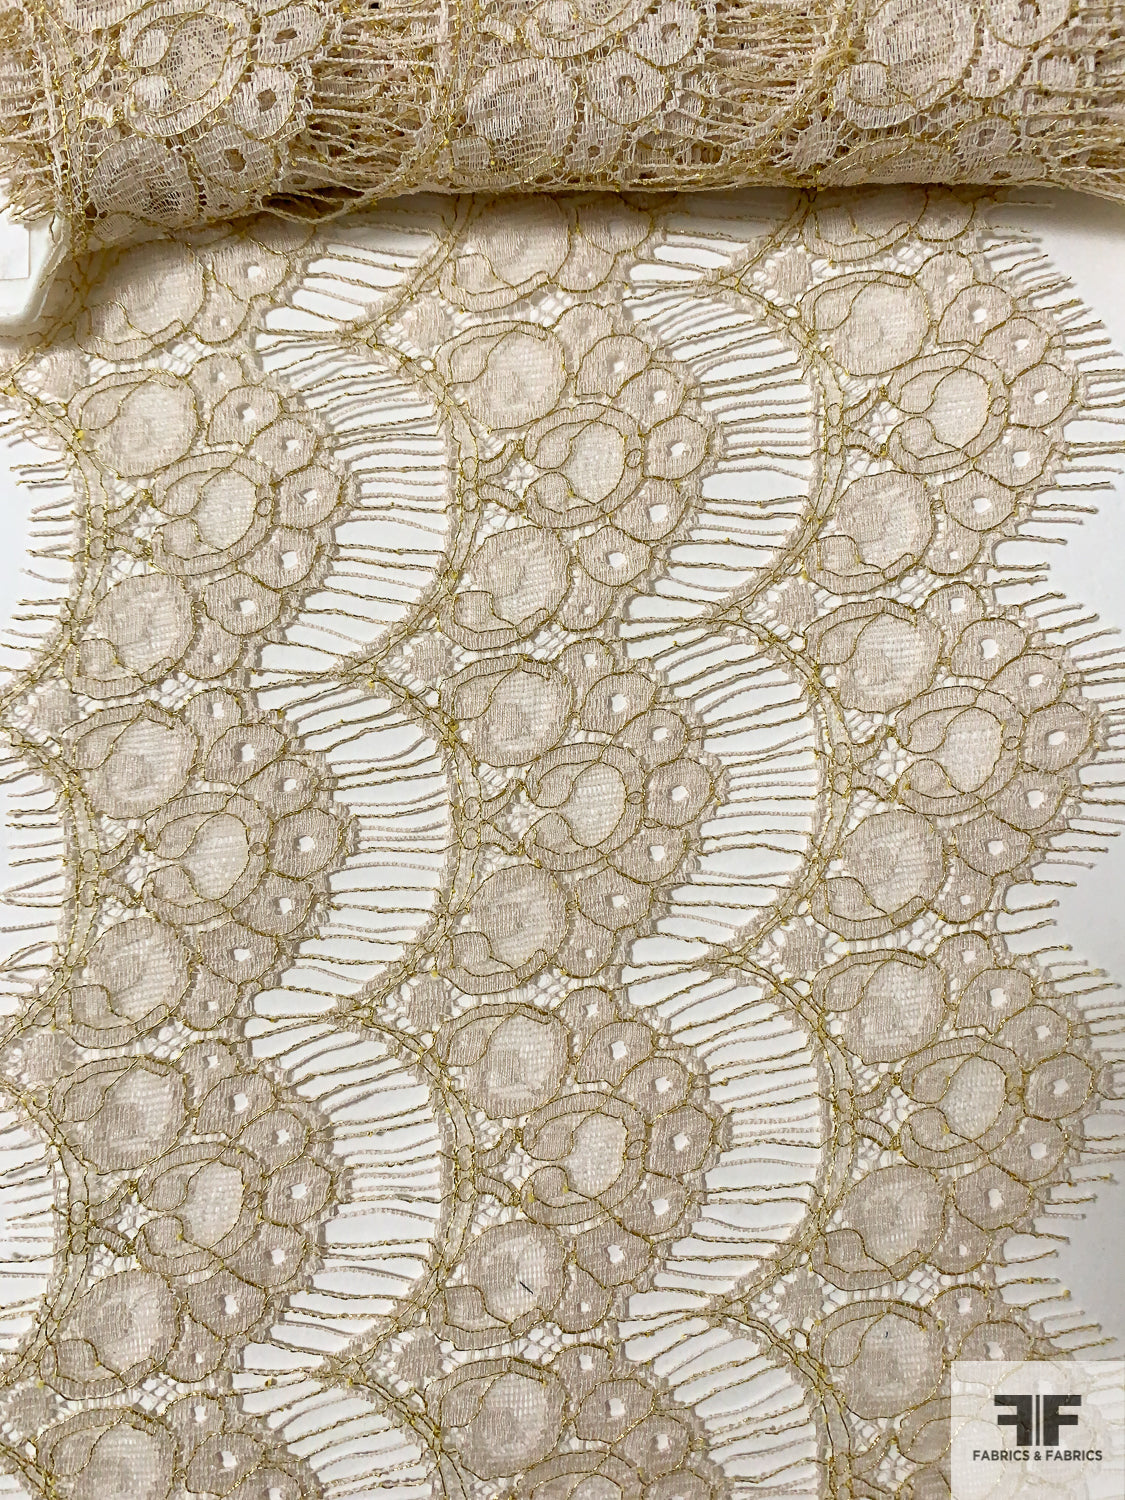 Multi-Scalloped Leavers Lace Trim - Beige / Gold - Fabric by the Yard